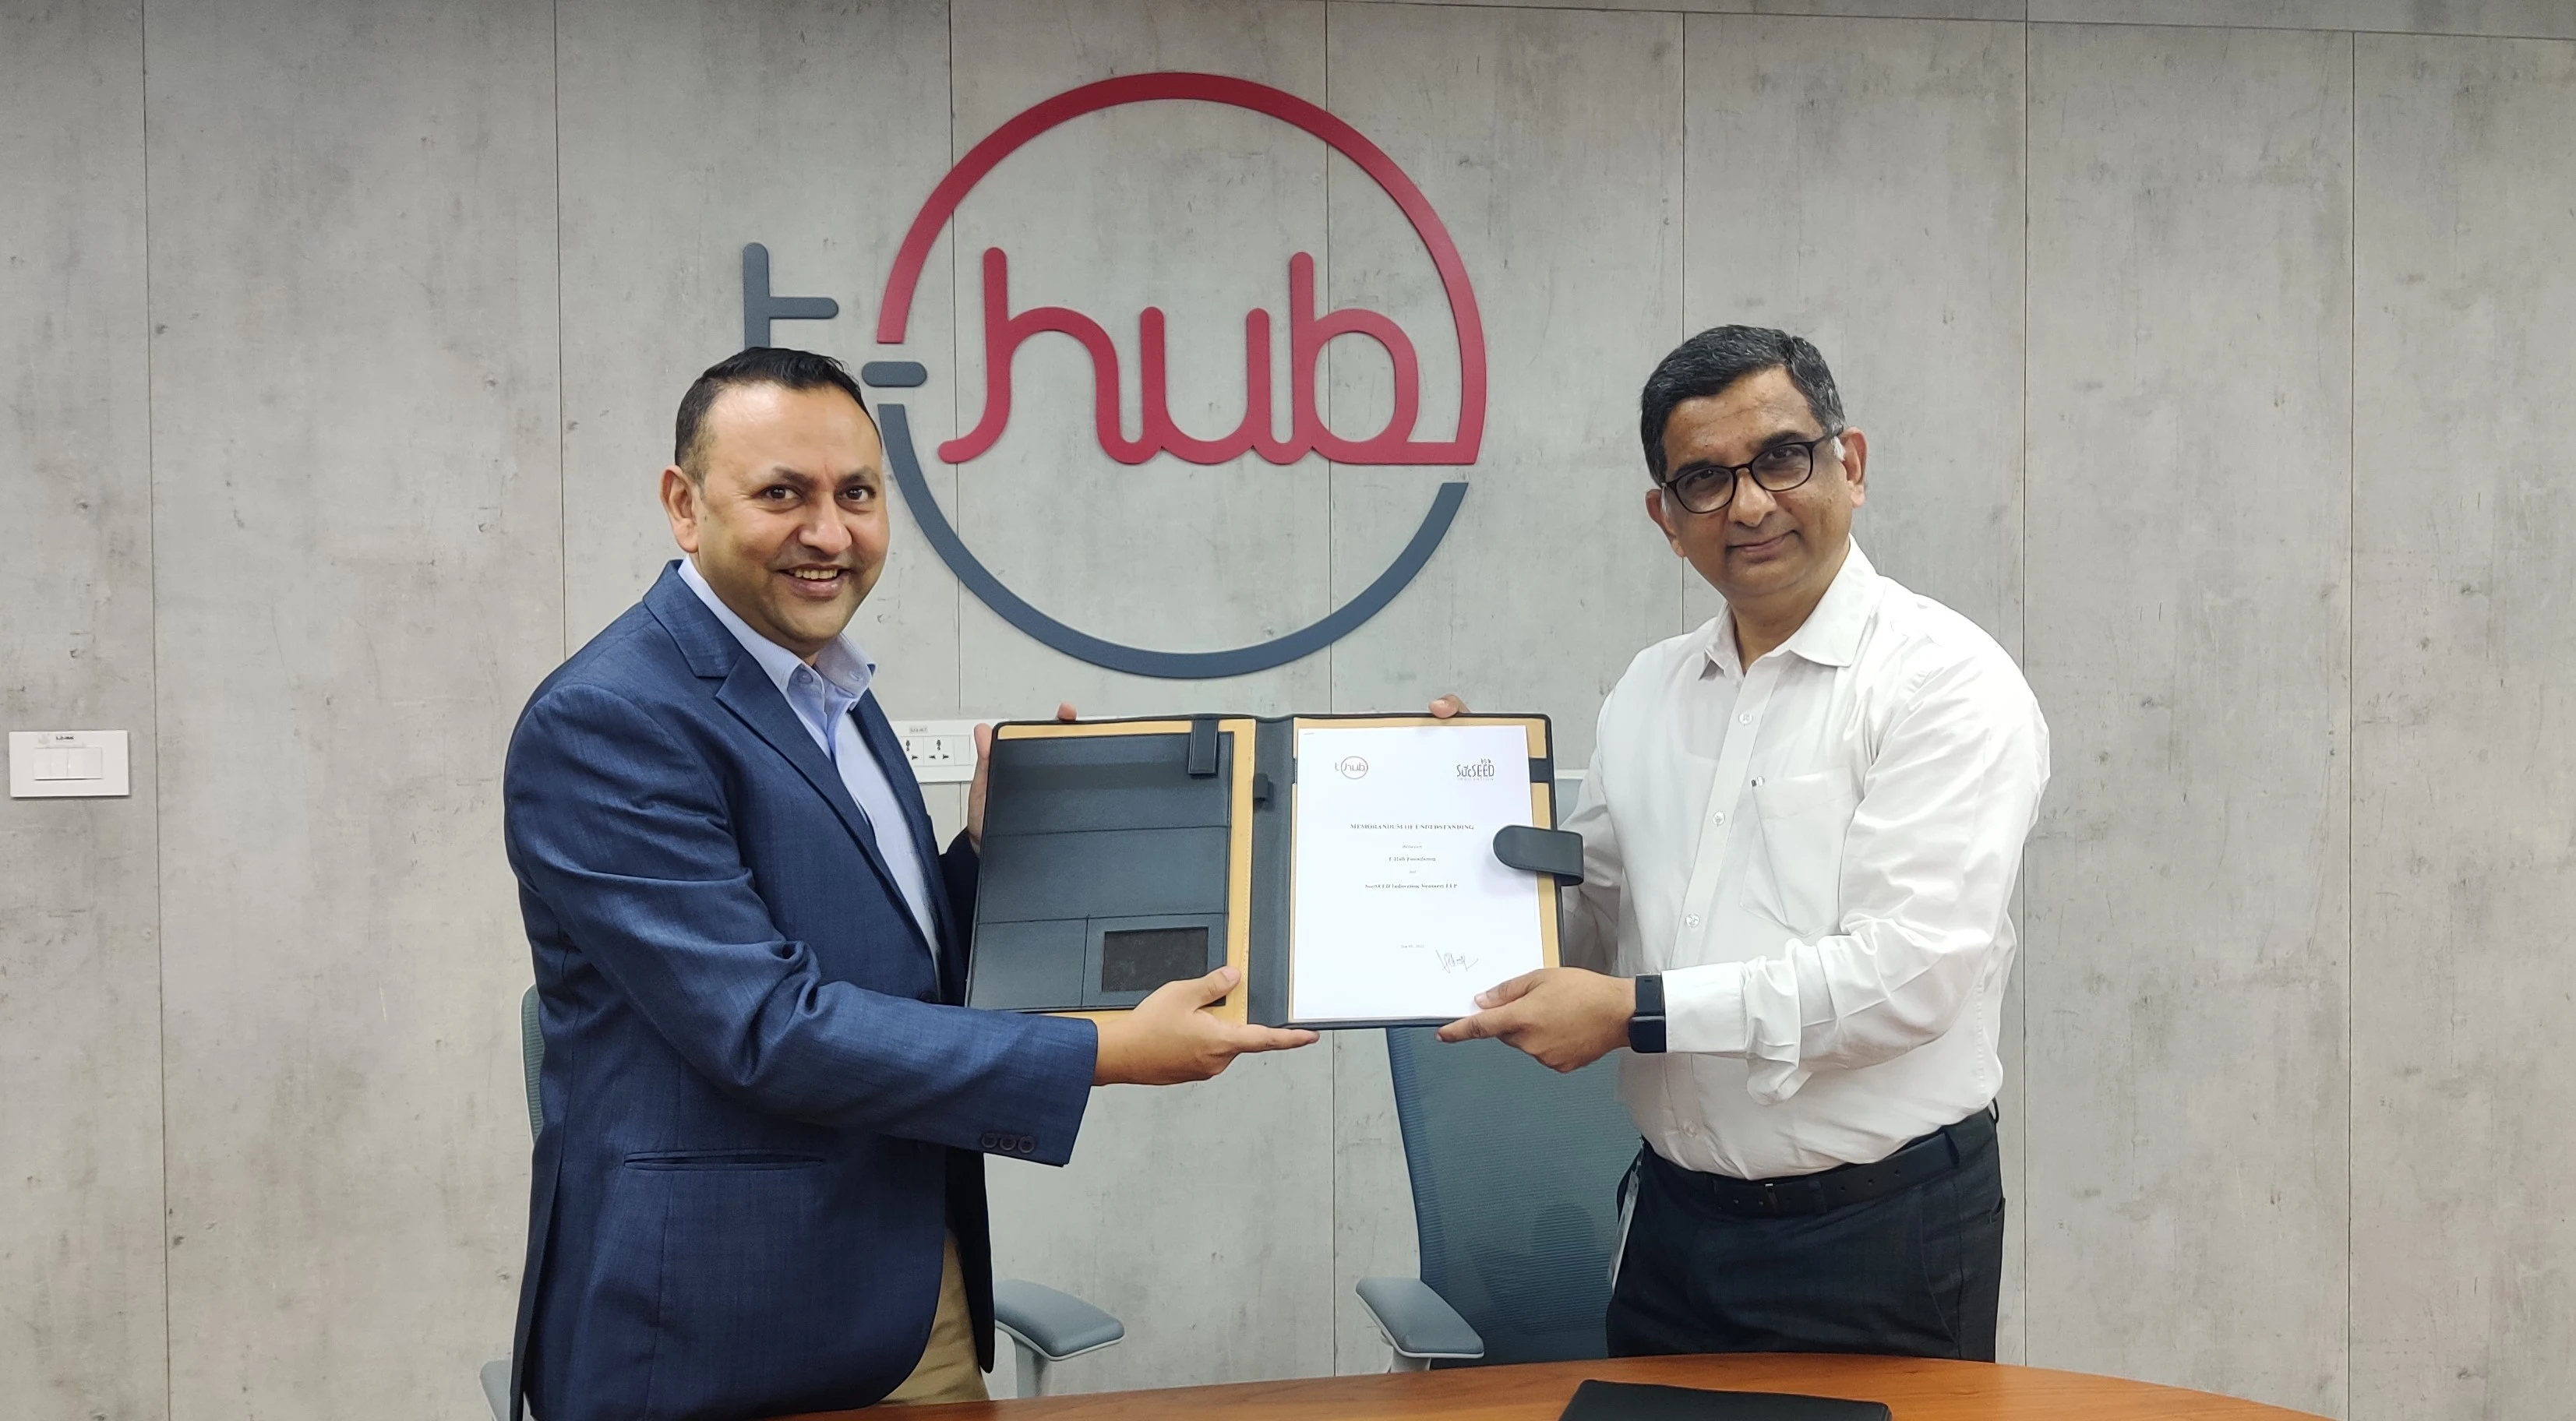 T-Hub Partners with SucSEED Indovation to Accelerate Investment Opportunities for DeepTech Startups in India